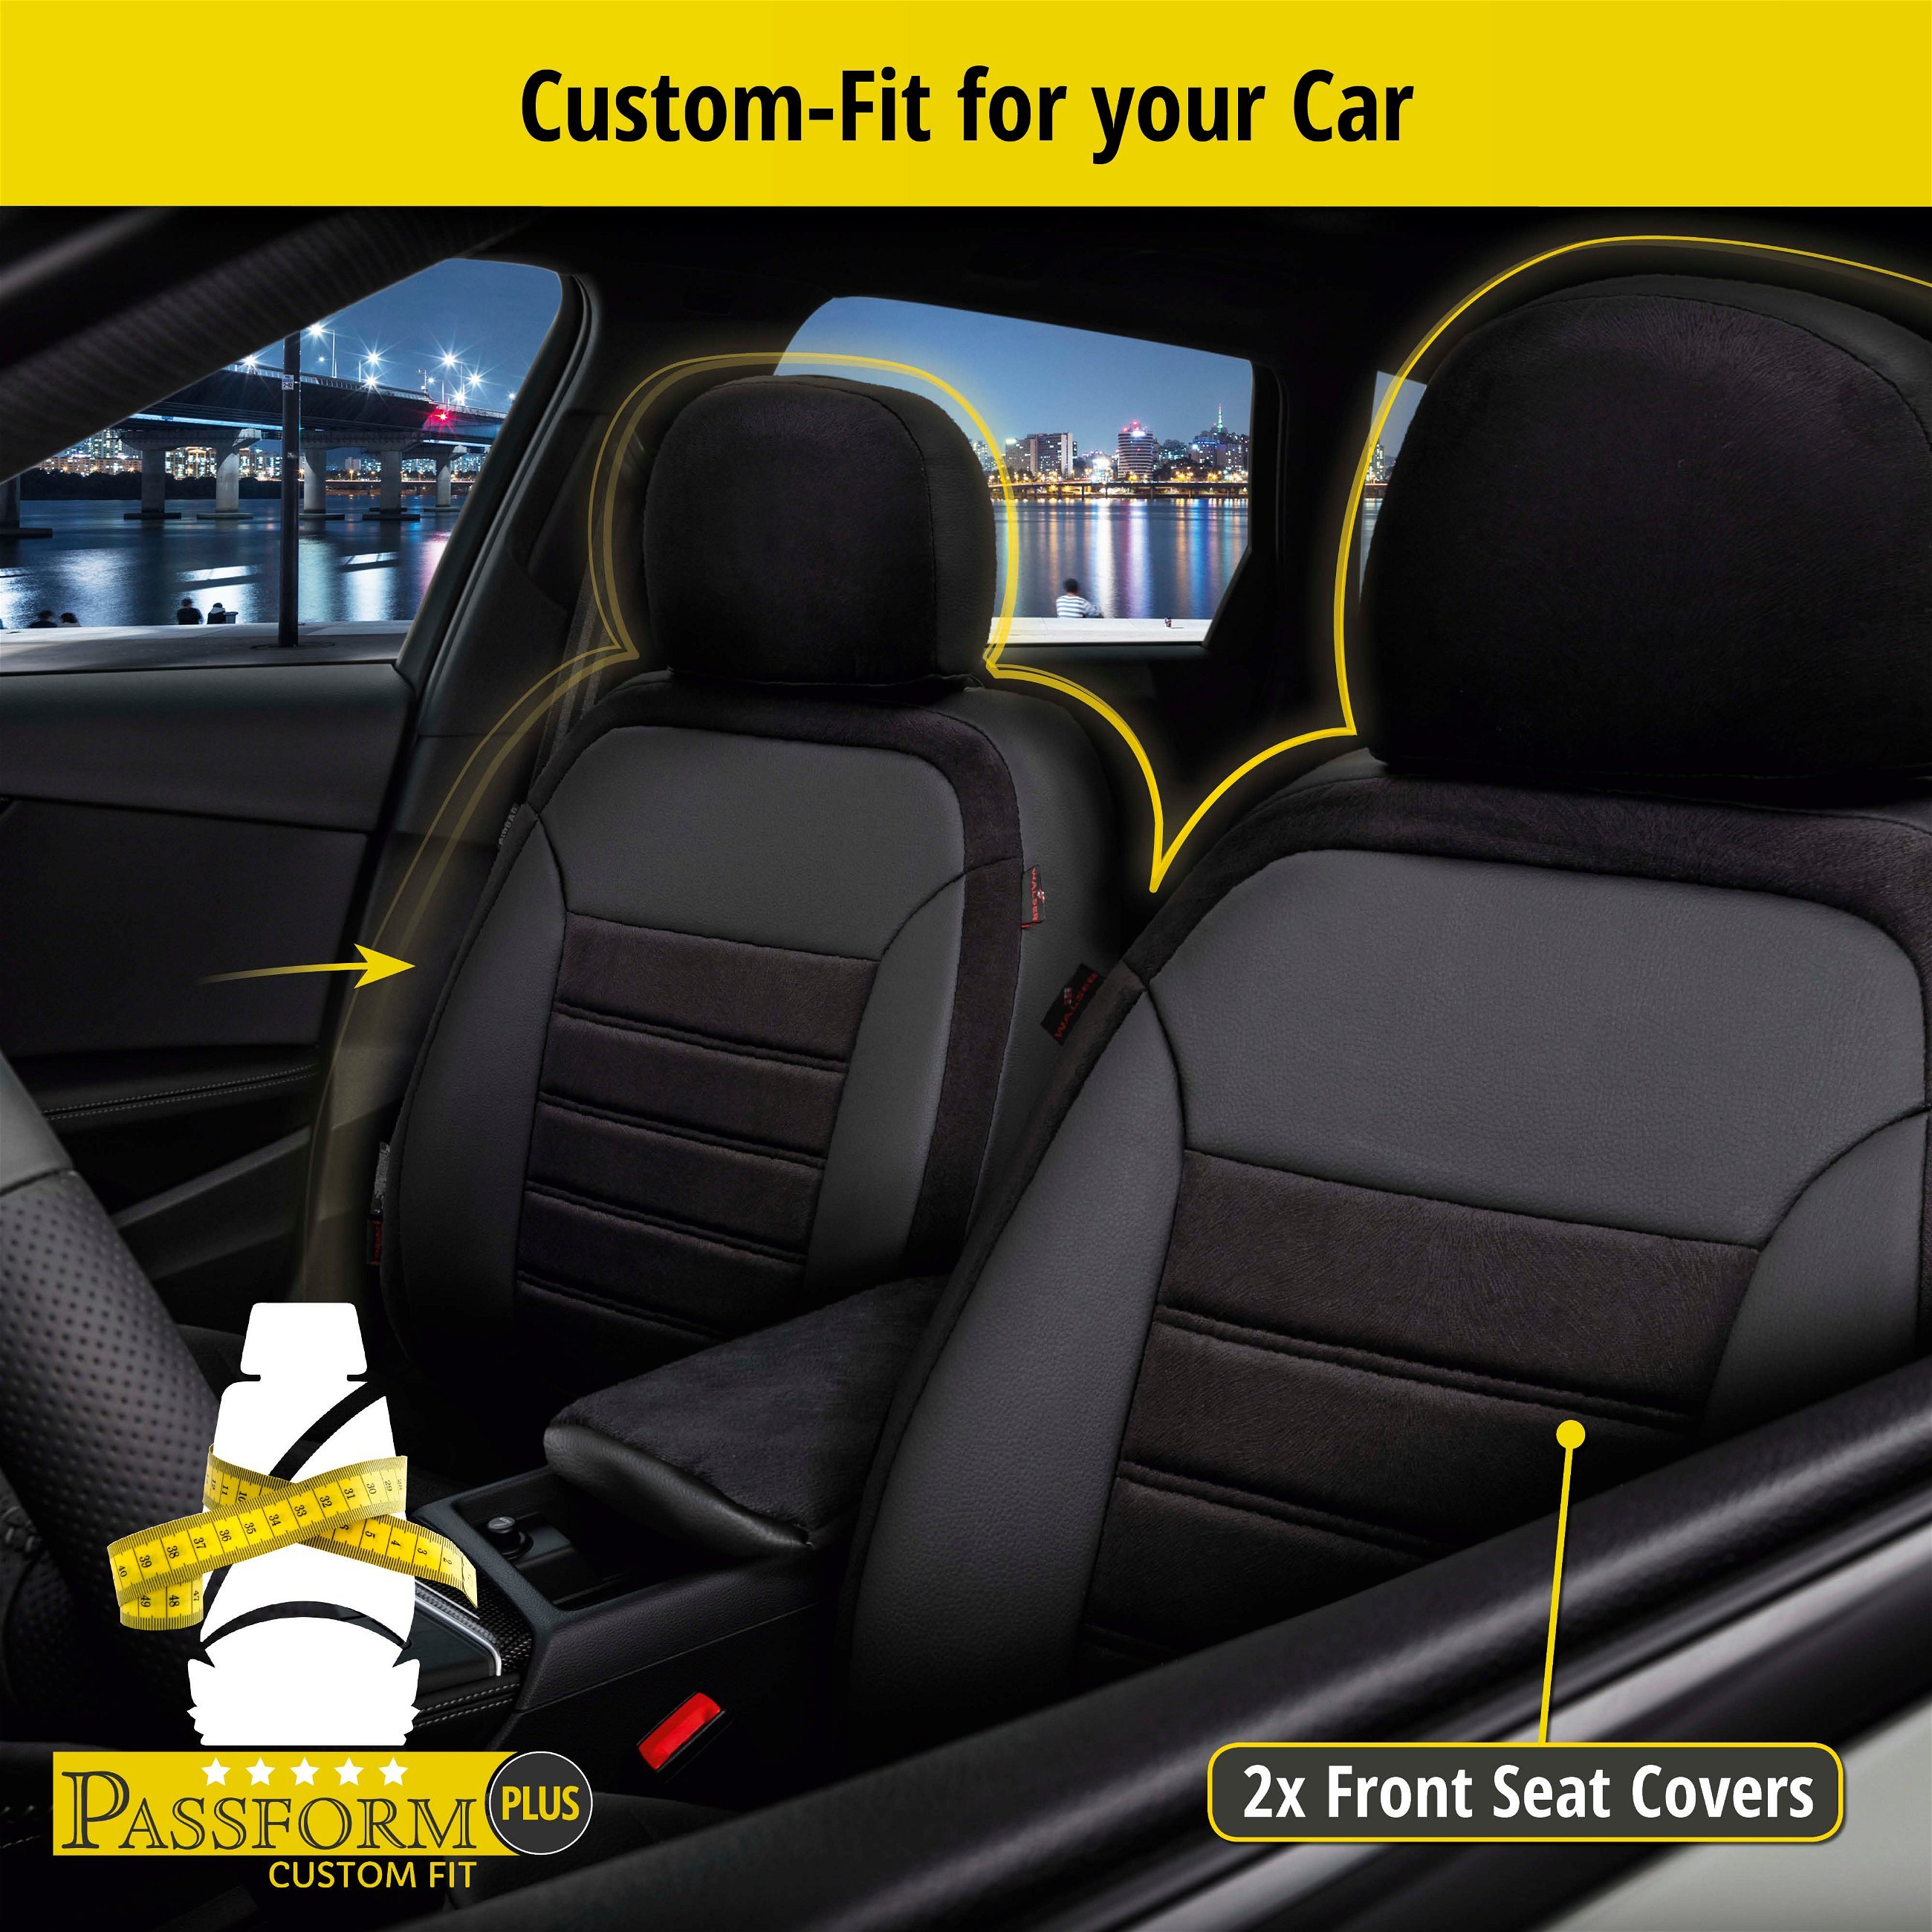 Seat Cover Bari for Skoda Octavia III Combi (5E5) 11/2012-Today, 2 seat covers for normal seats